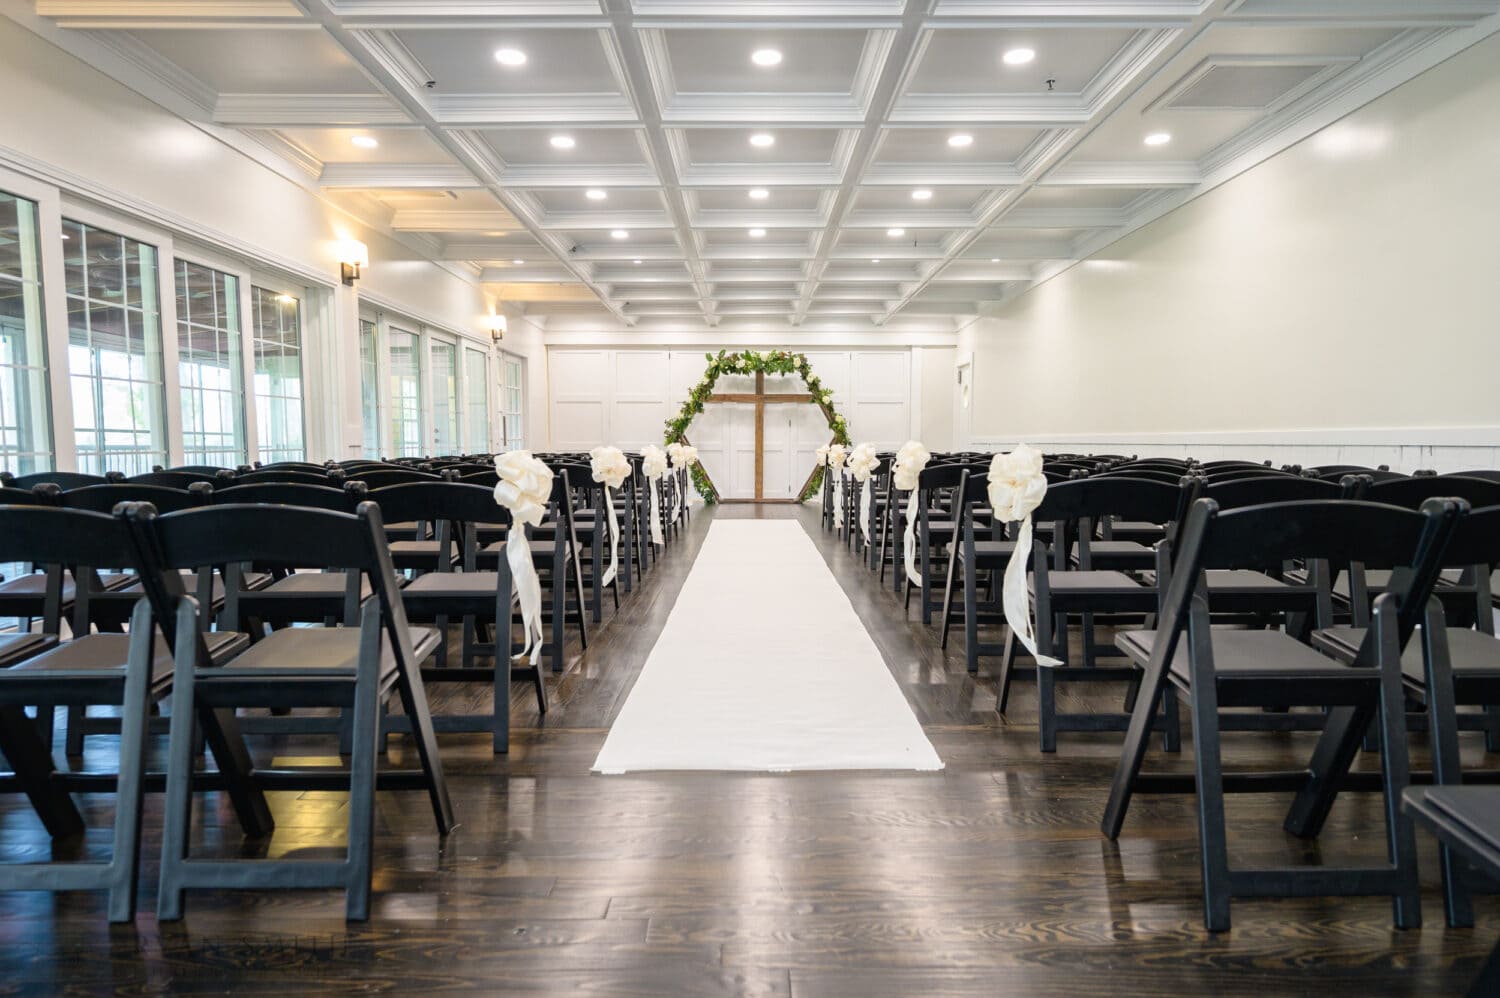 New ceremony space in the recently remodeled Village House - The Village House at Litchfield